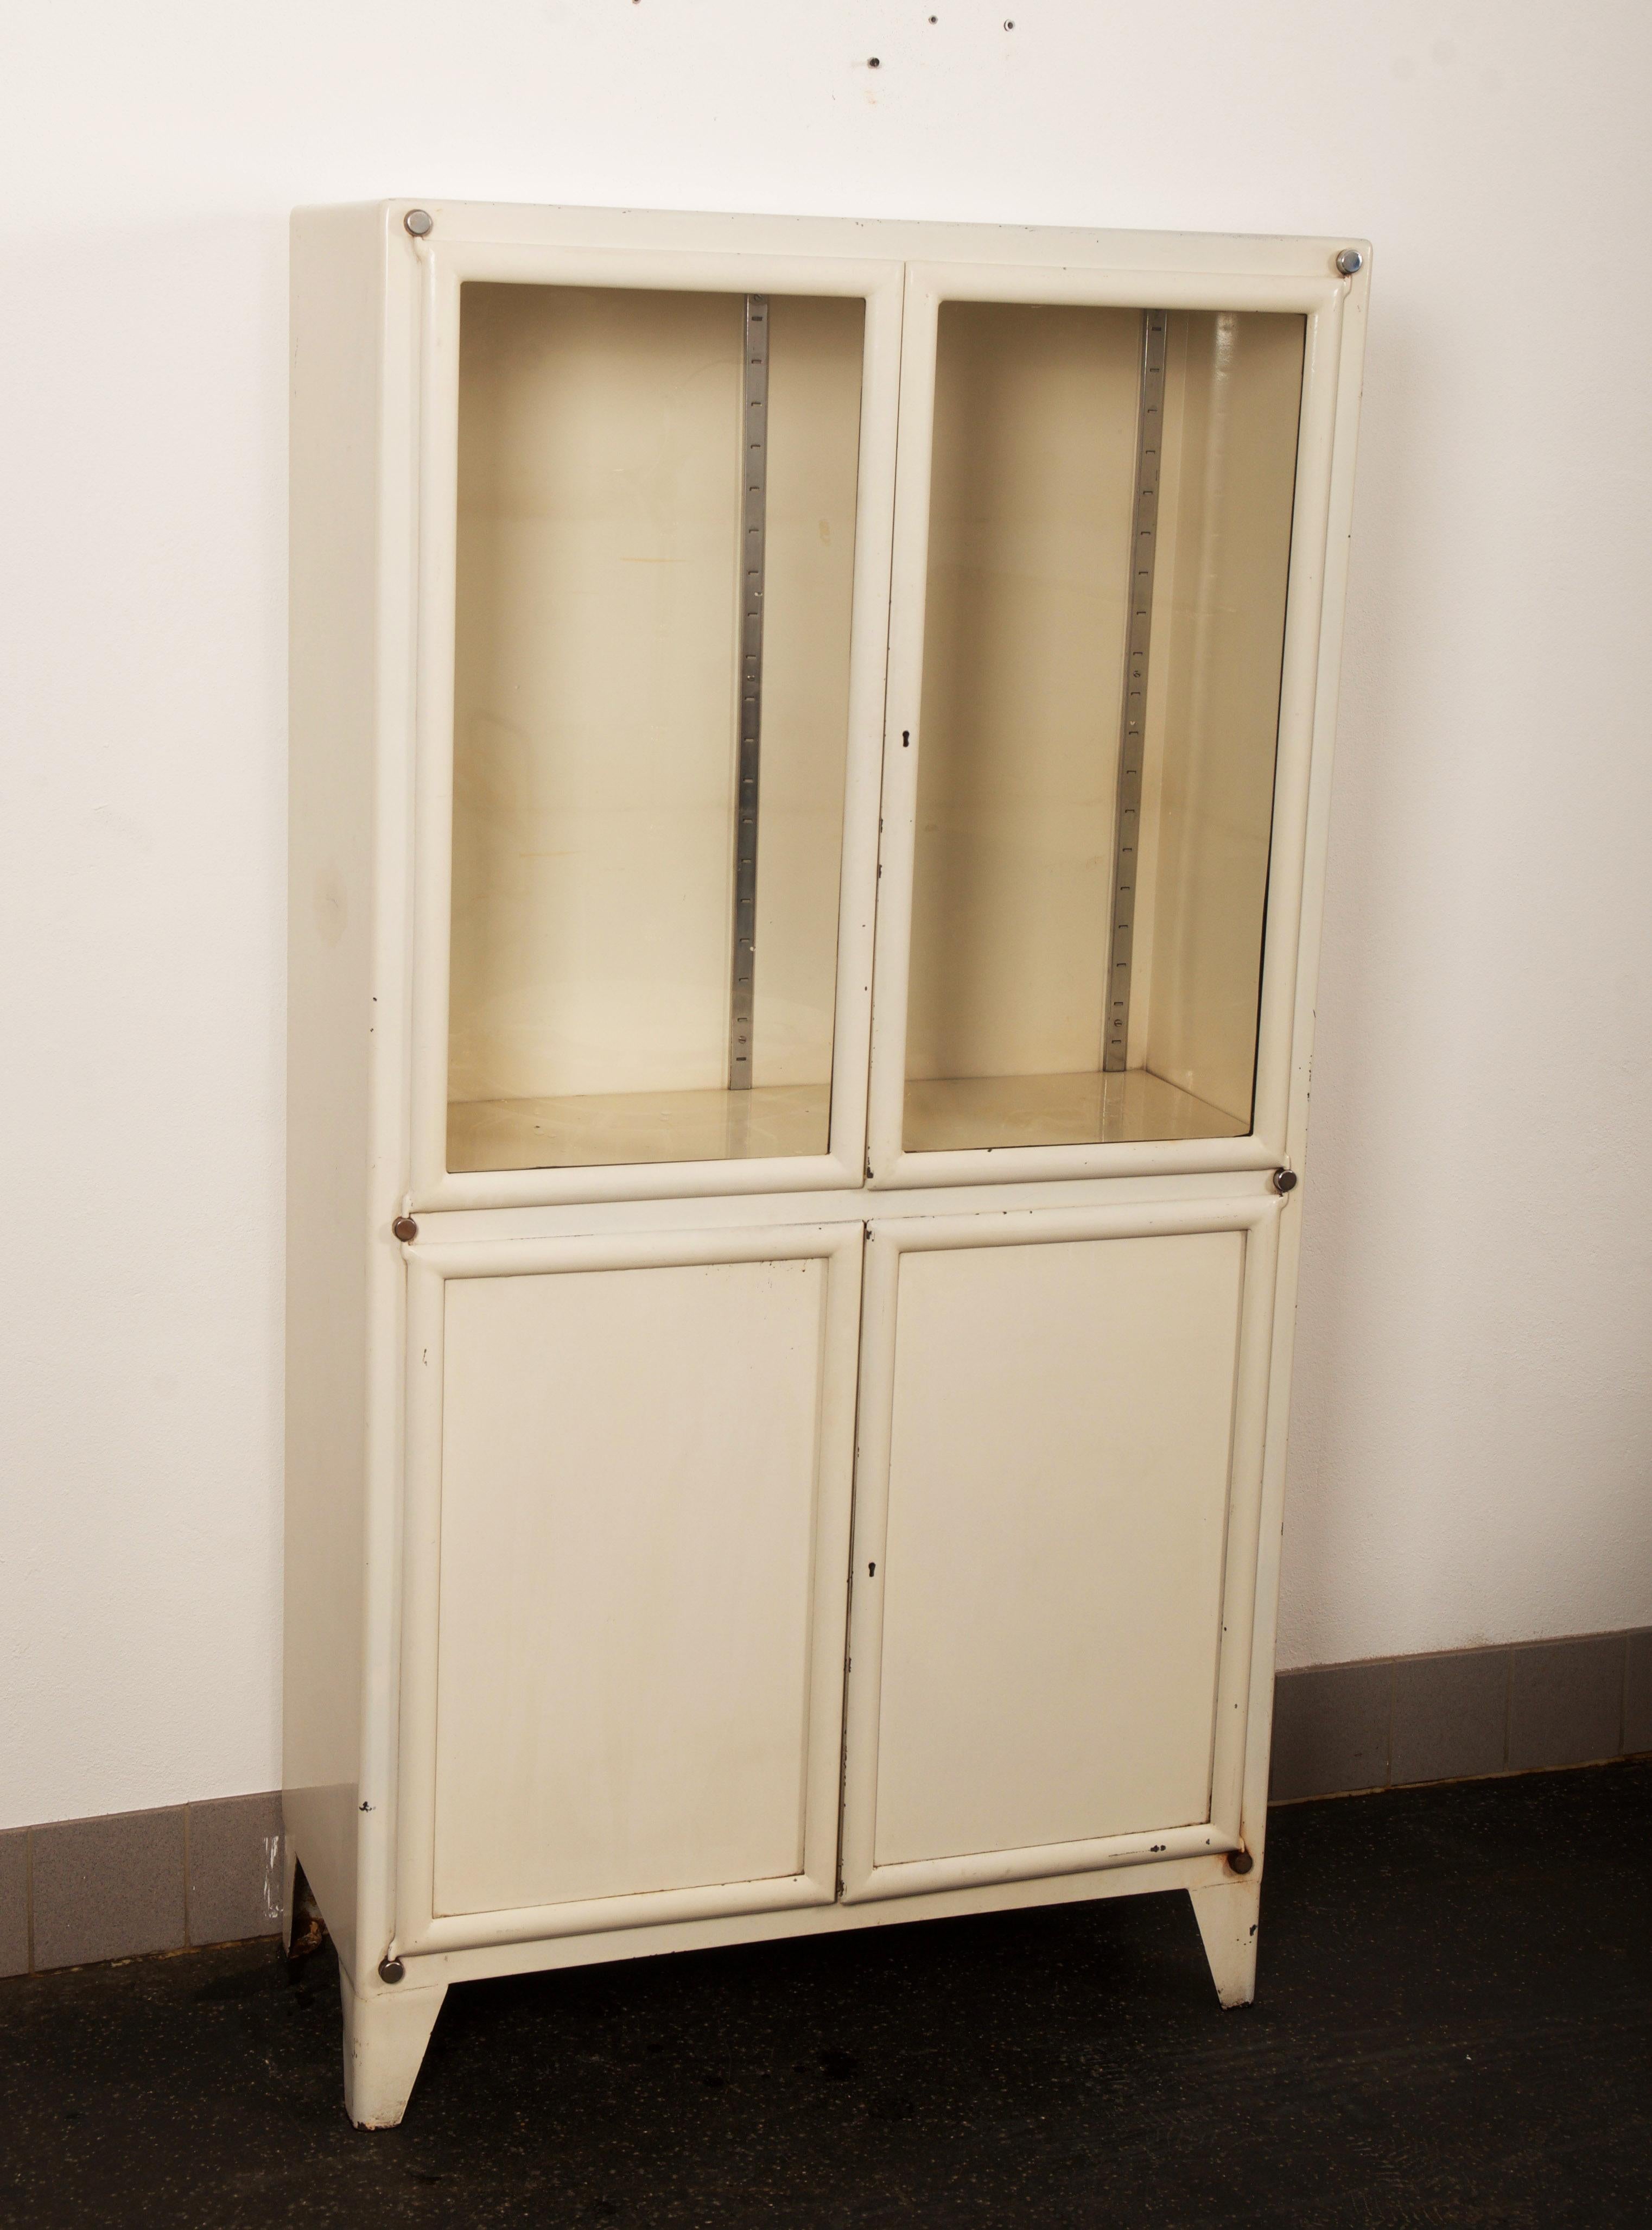 Steel painted with each two glass doors and steel doors. Made by Kovona in the late 1940s-early 1950s in former Czechoslovakia.
Used condition, missing glass shelfs and original key.
 